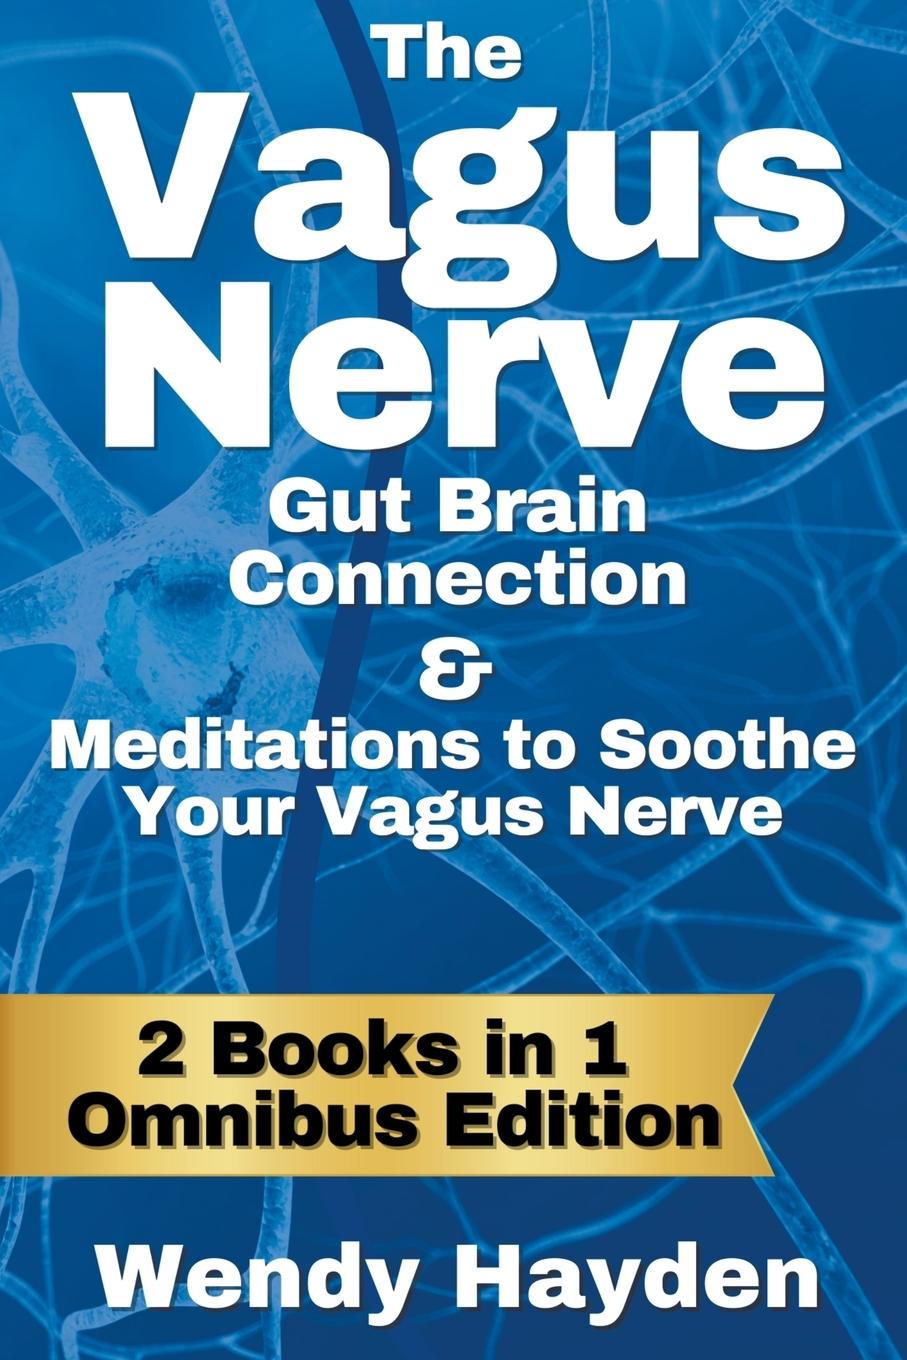 Knjiga The Vagus Nerve Gut Brain Connection & Meditations to Soothe Your Vagus Nerve 